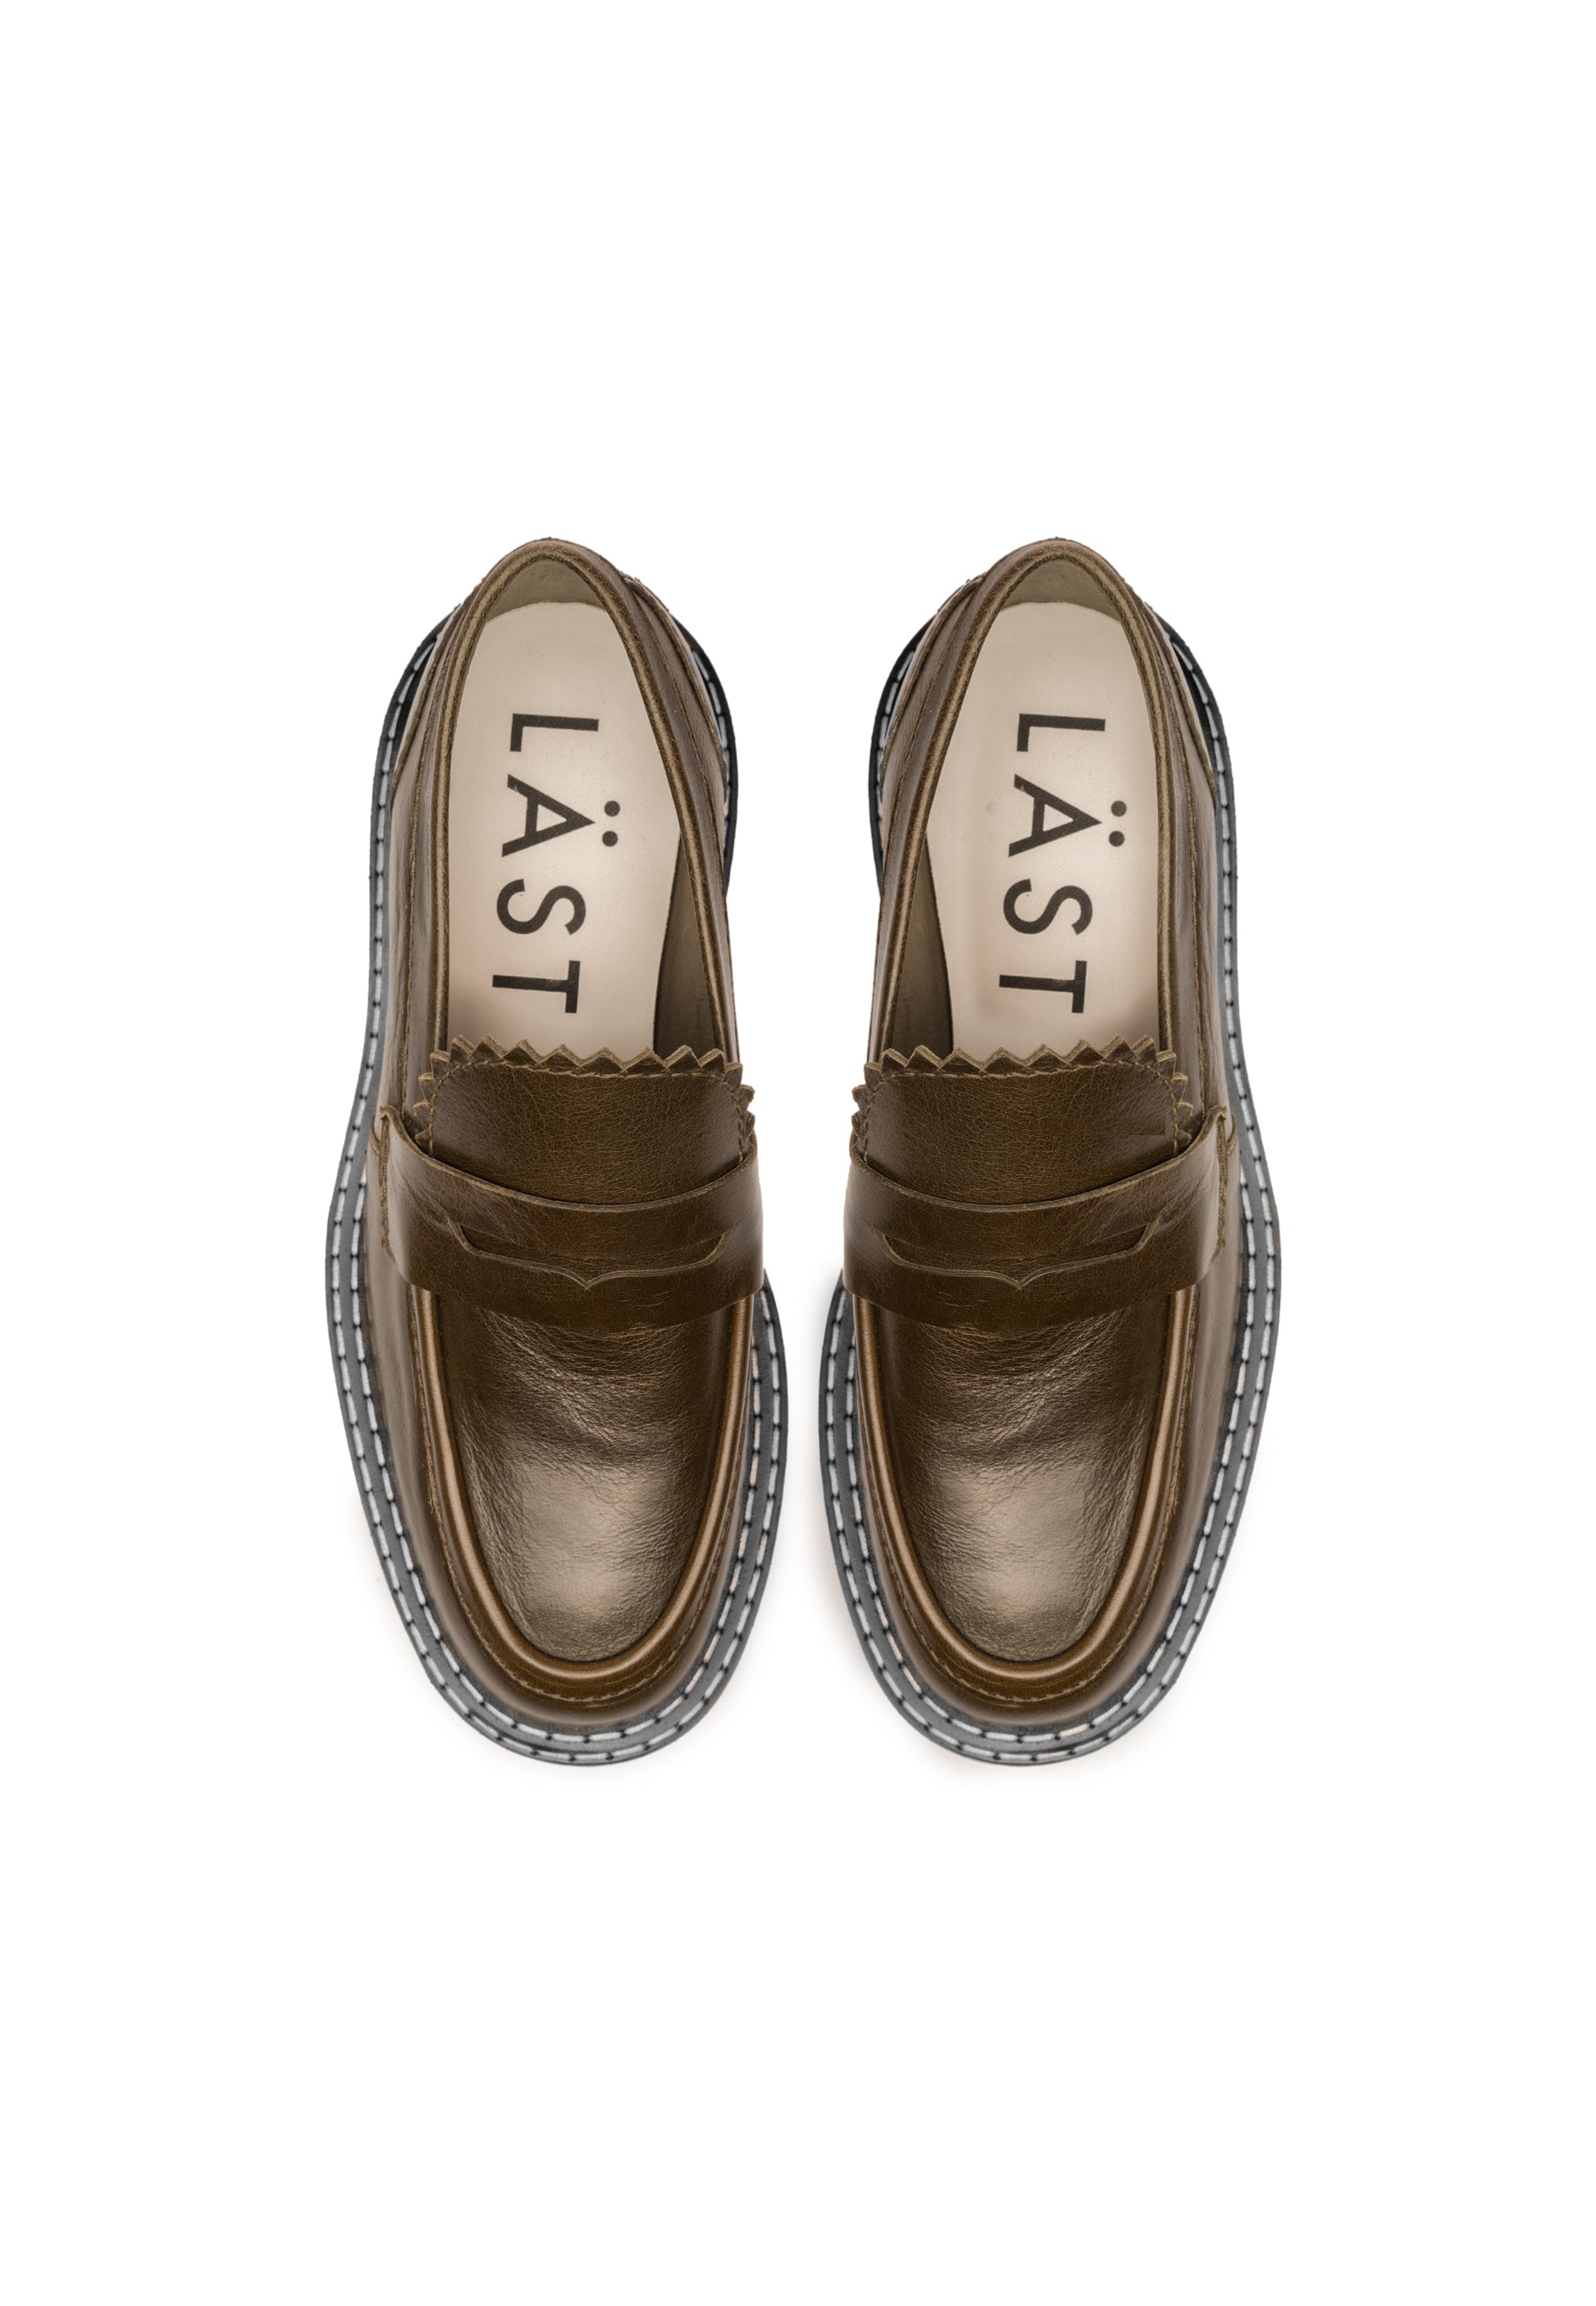 Matter Olive Leather Loafers LAST1682 - 4